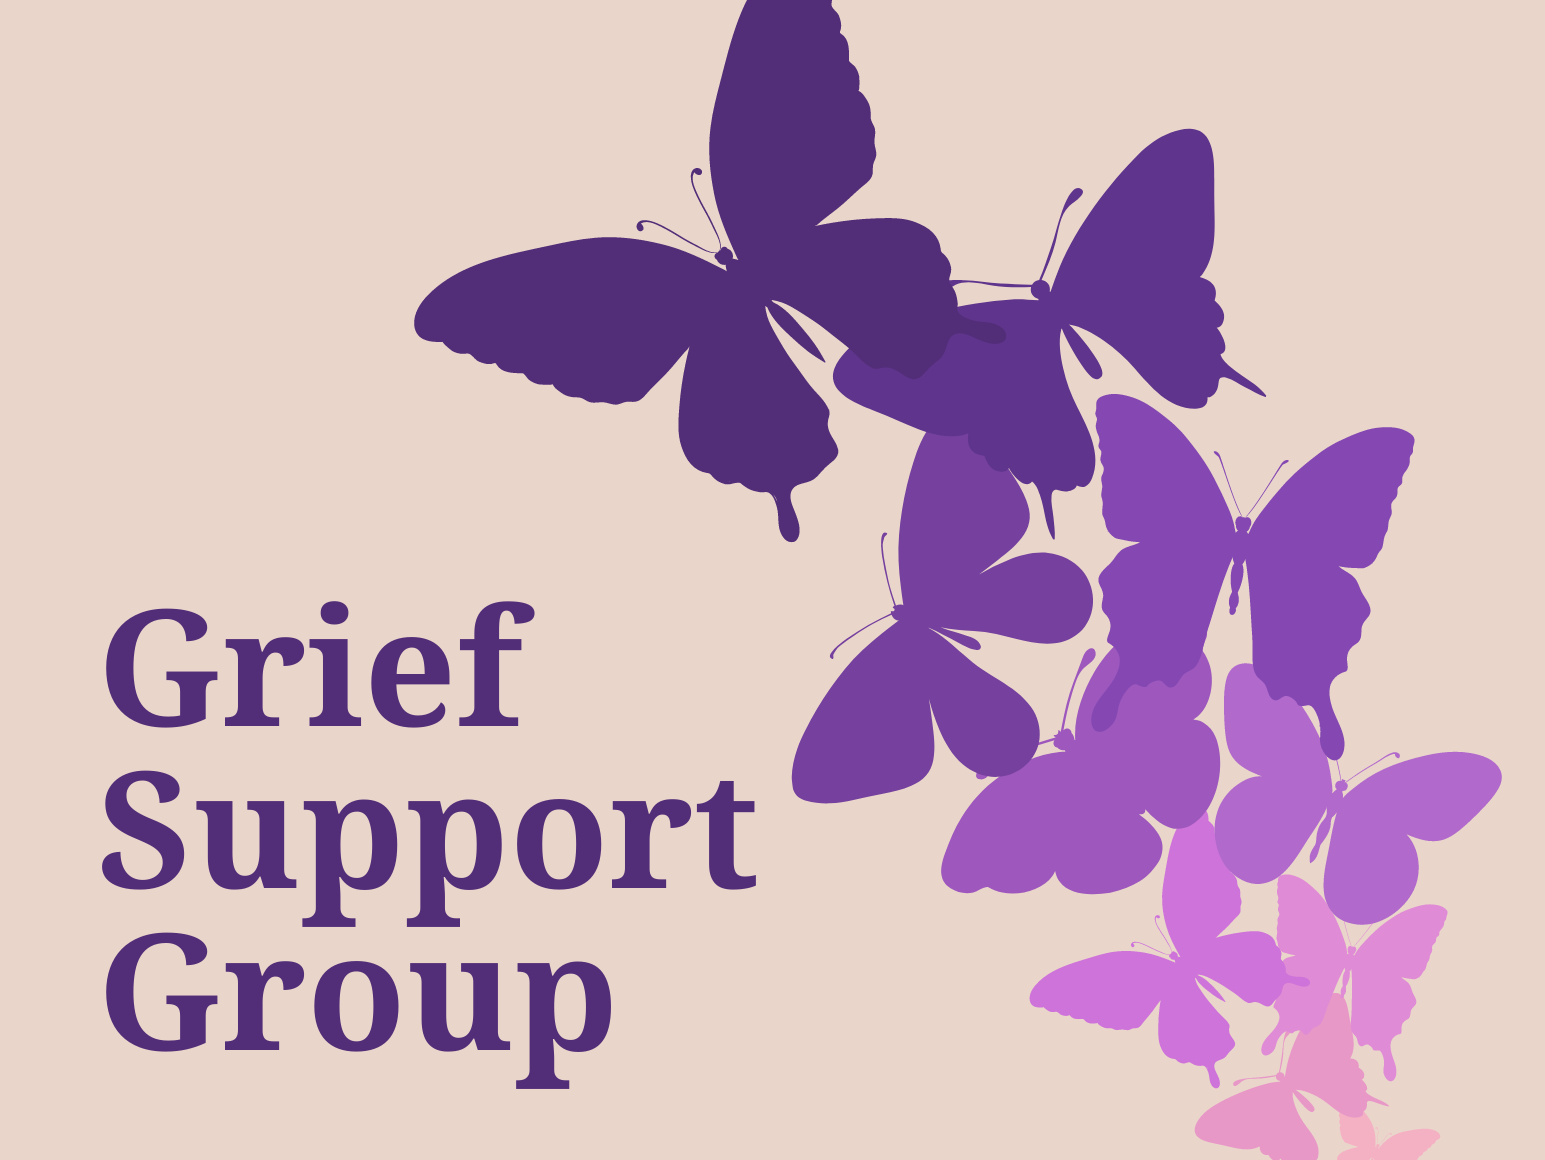 Grief Support Group meets April 26 in Manteo